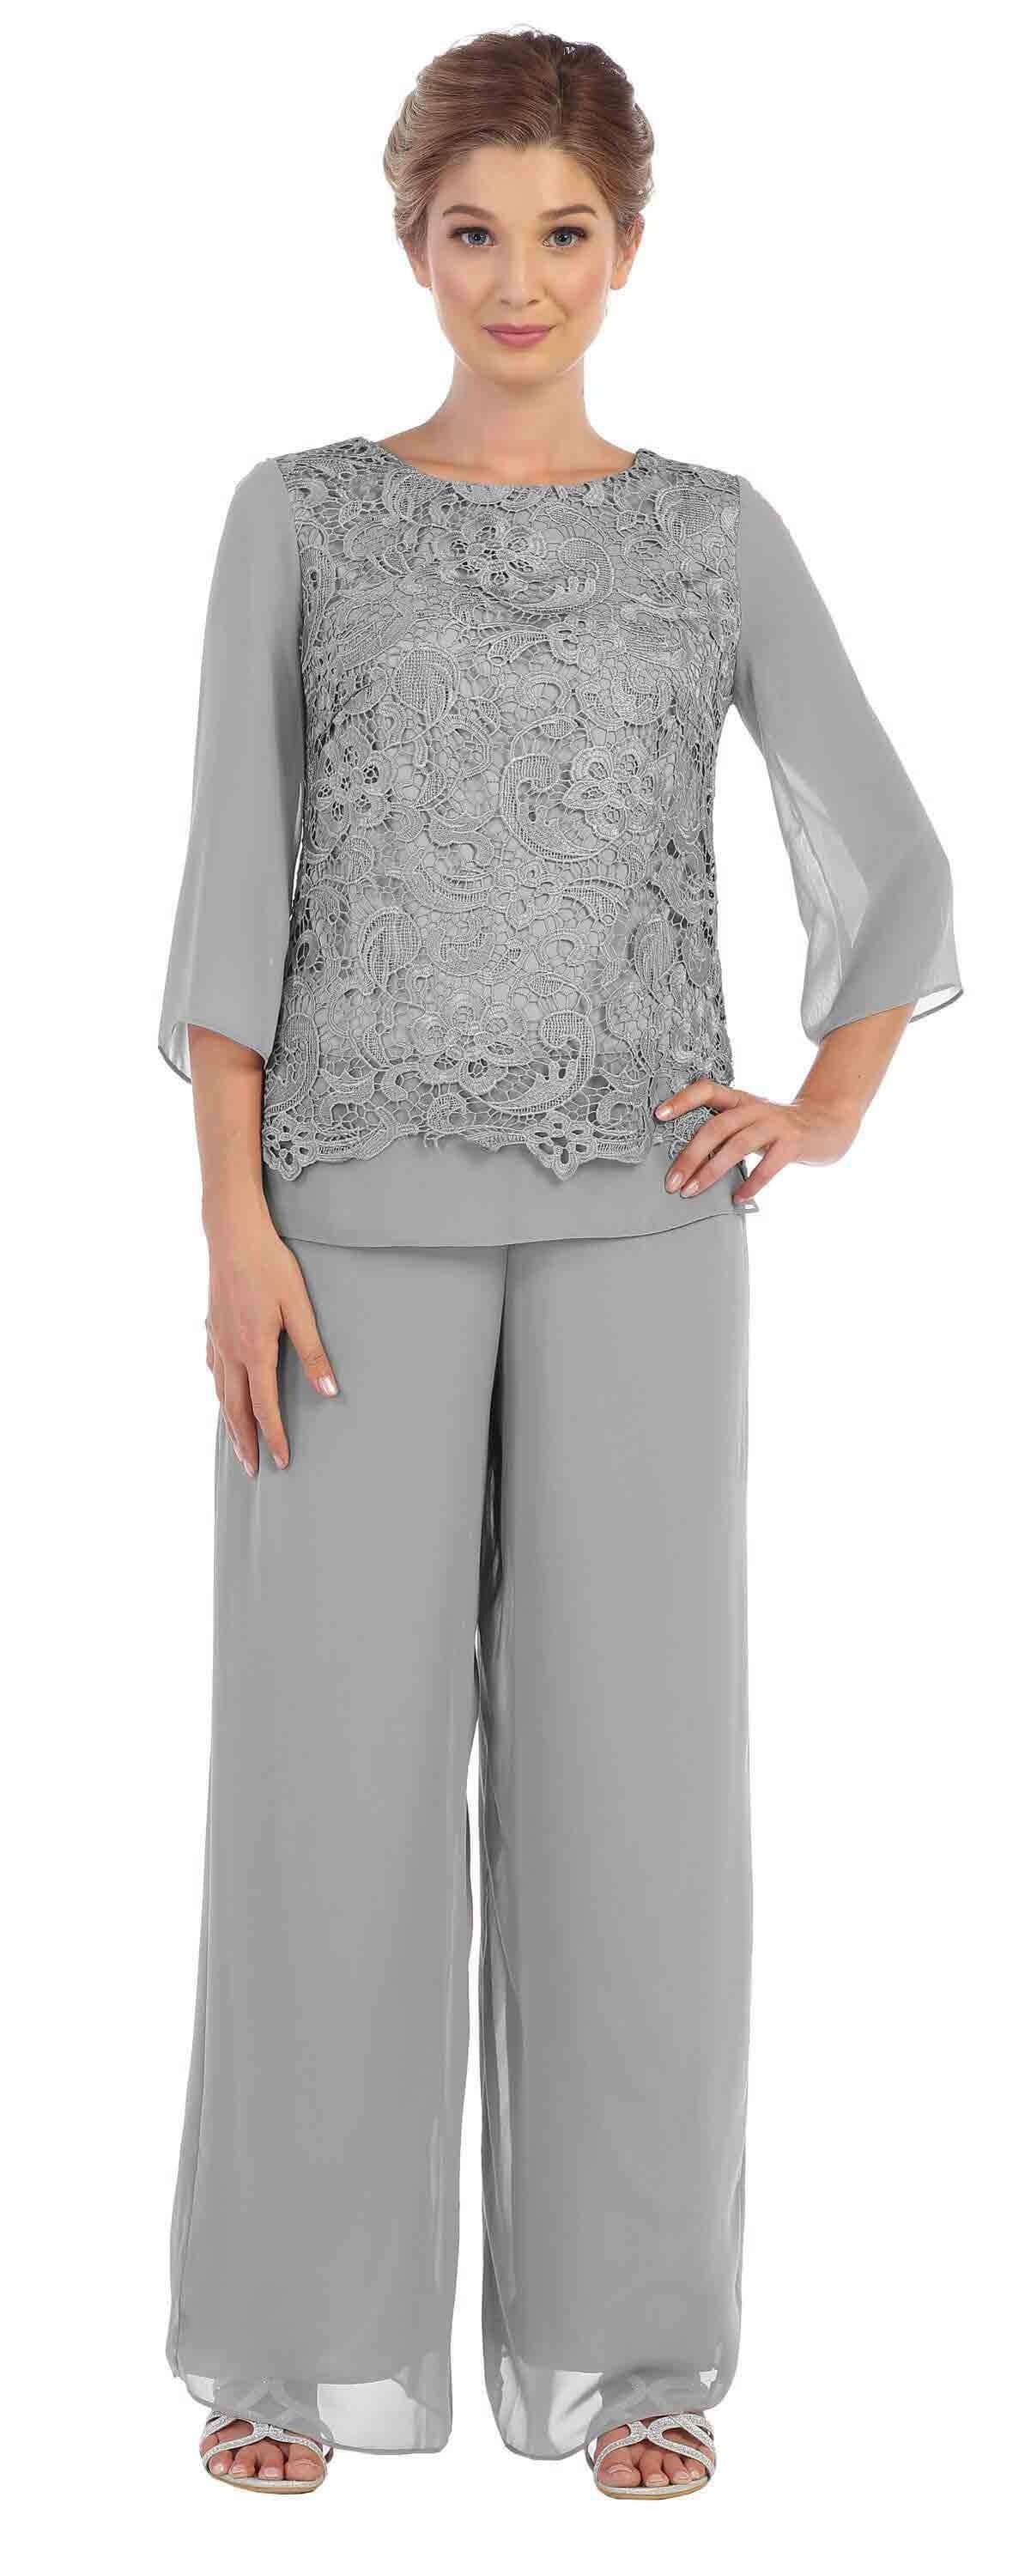 Black Formal 2 Piece Mother of the Bride Lace Pant Suit for $135.99 – The  Dress Outlet